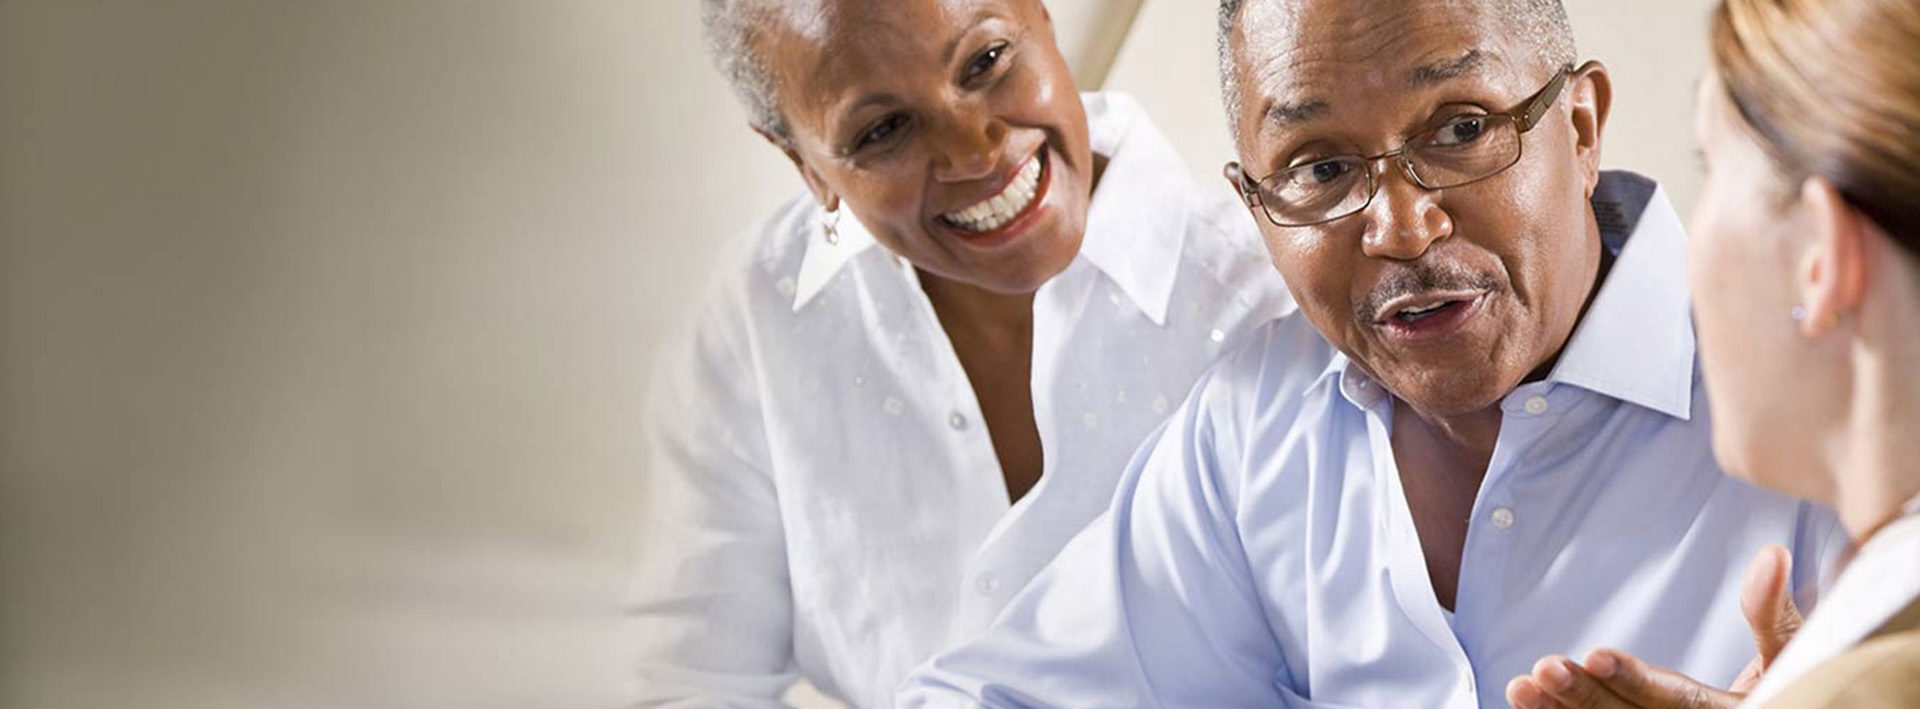 Start here to find the right senior care.